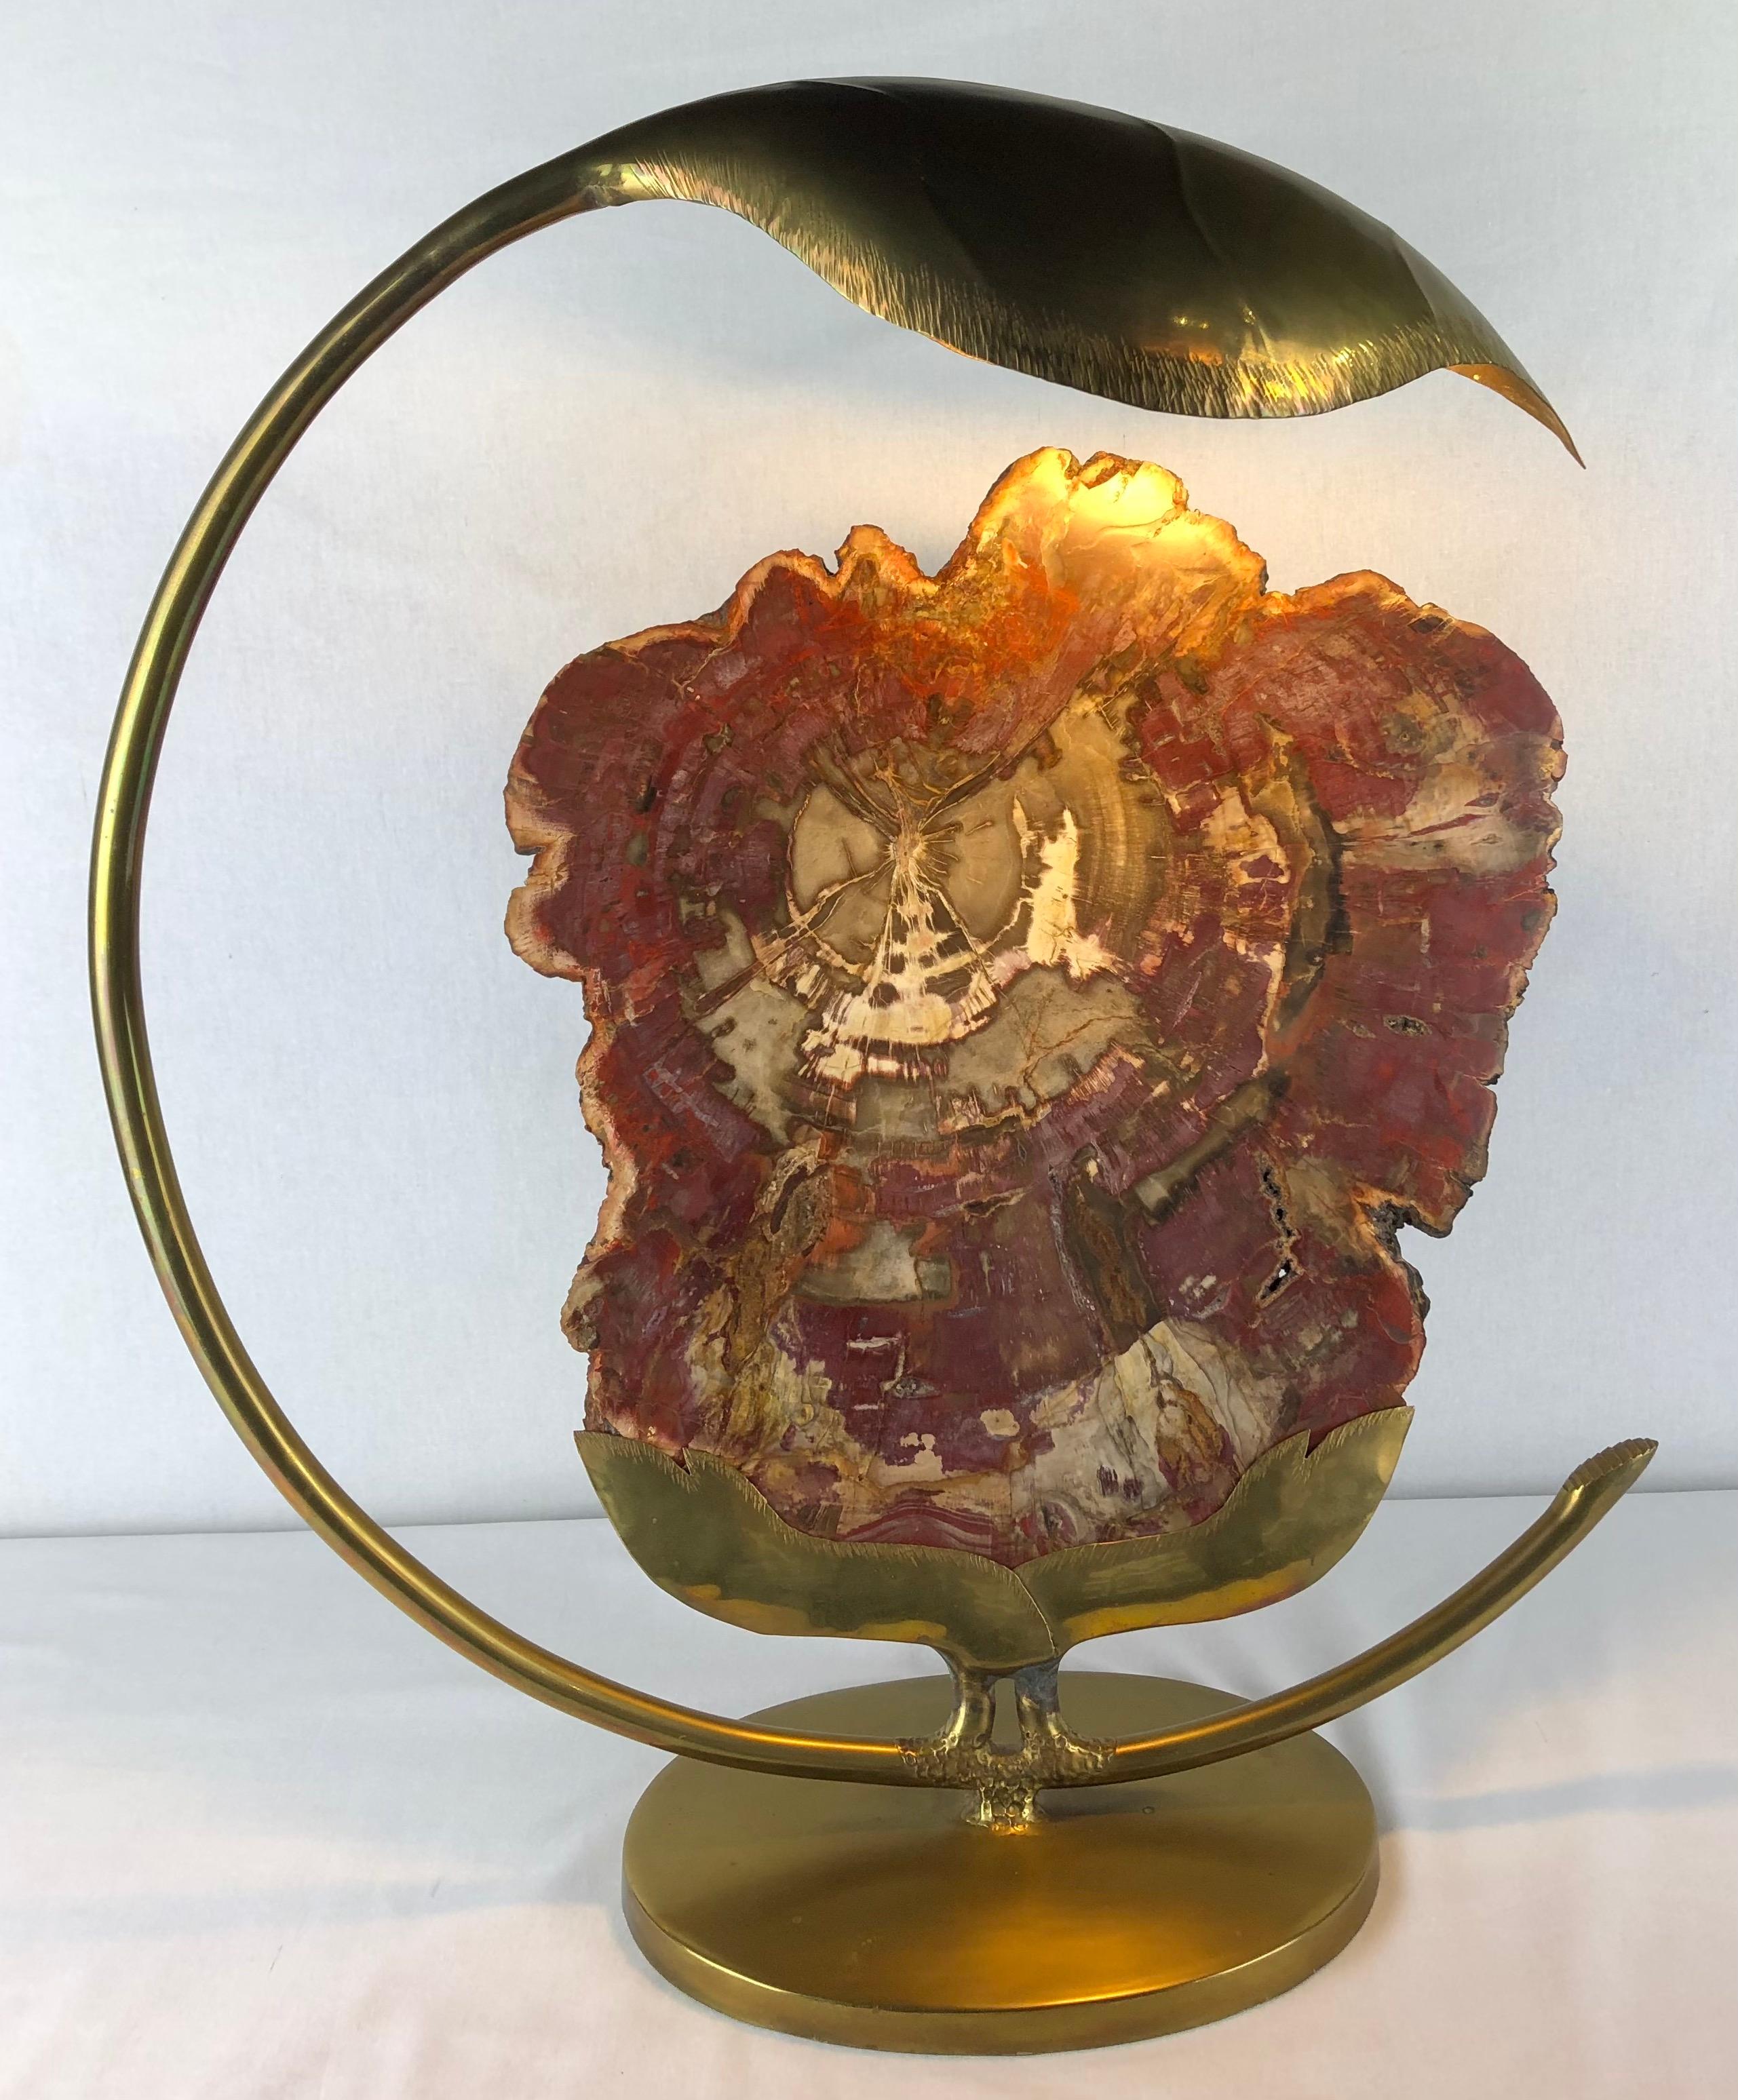 This striking table lamp, designed by renowned French artist Henri Fernandez in the 1970s, will add a touch of sculptural elegance to any room. Crafted from brass and featuring a unique agate quartz or stone element, the lamp creates a captivating